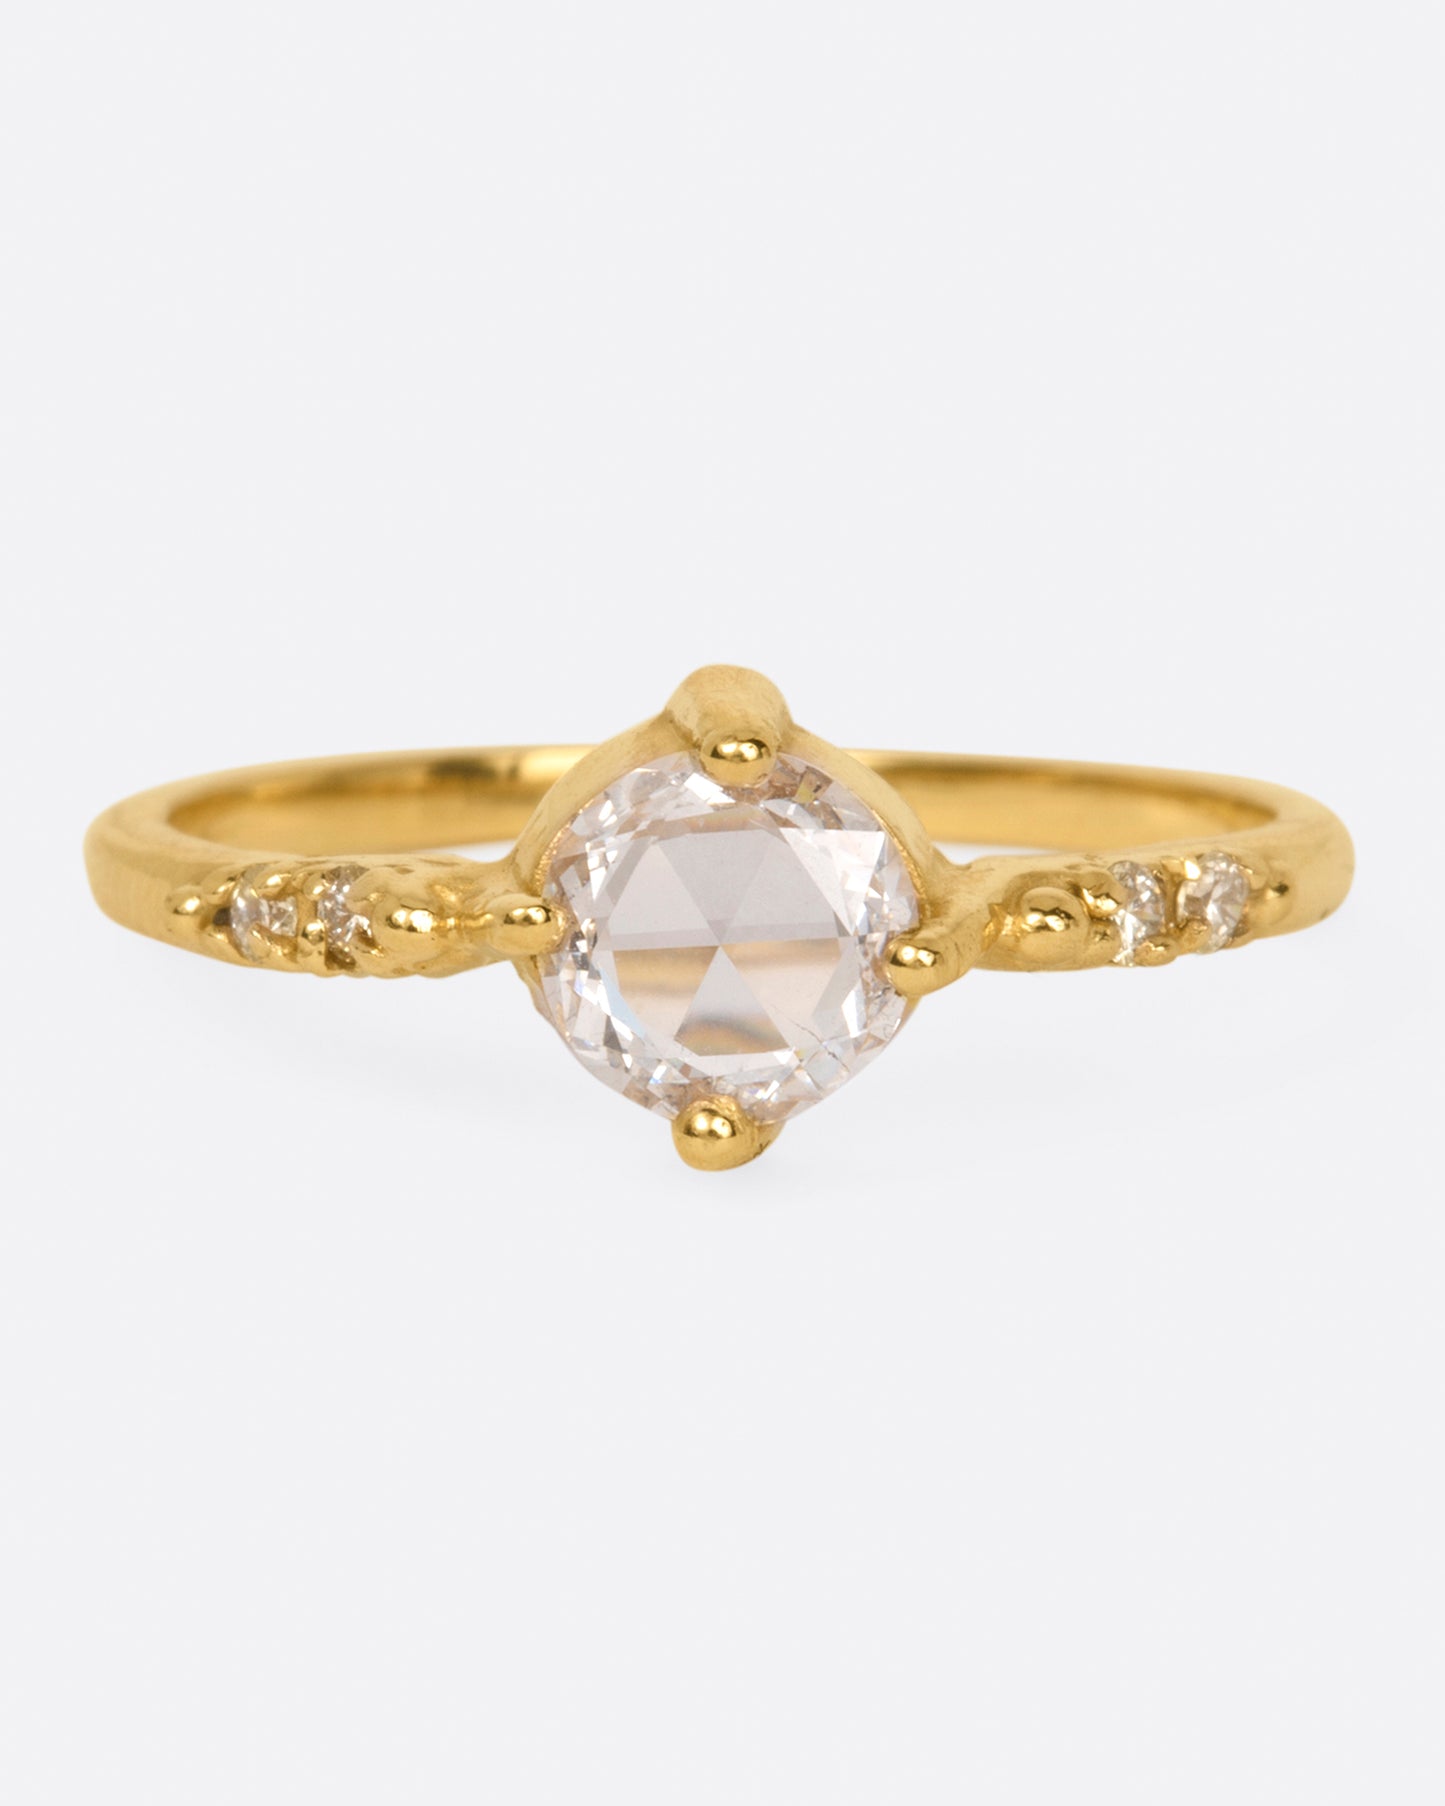 A yellow gold ring with a prong set rose cut diamond at the center and two diamonds on either side, shown from the front.